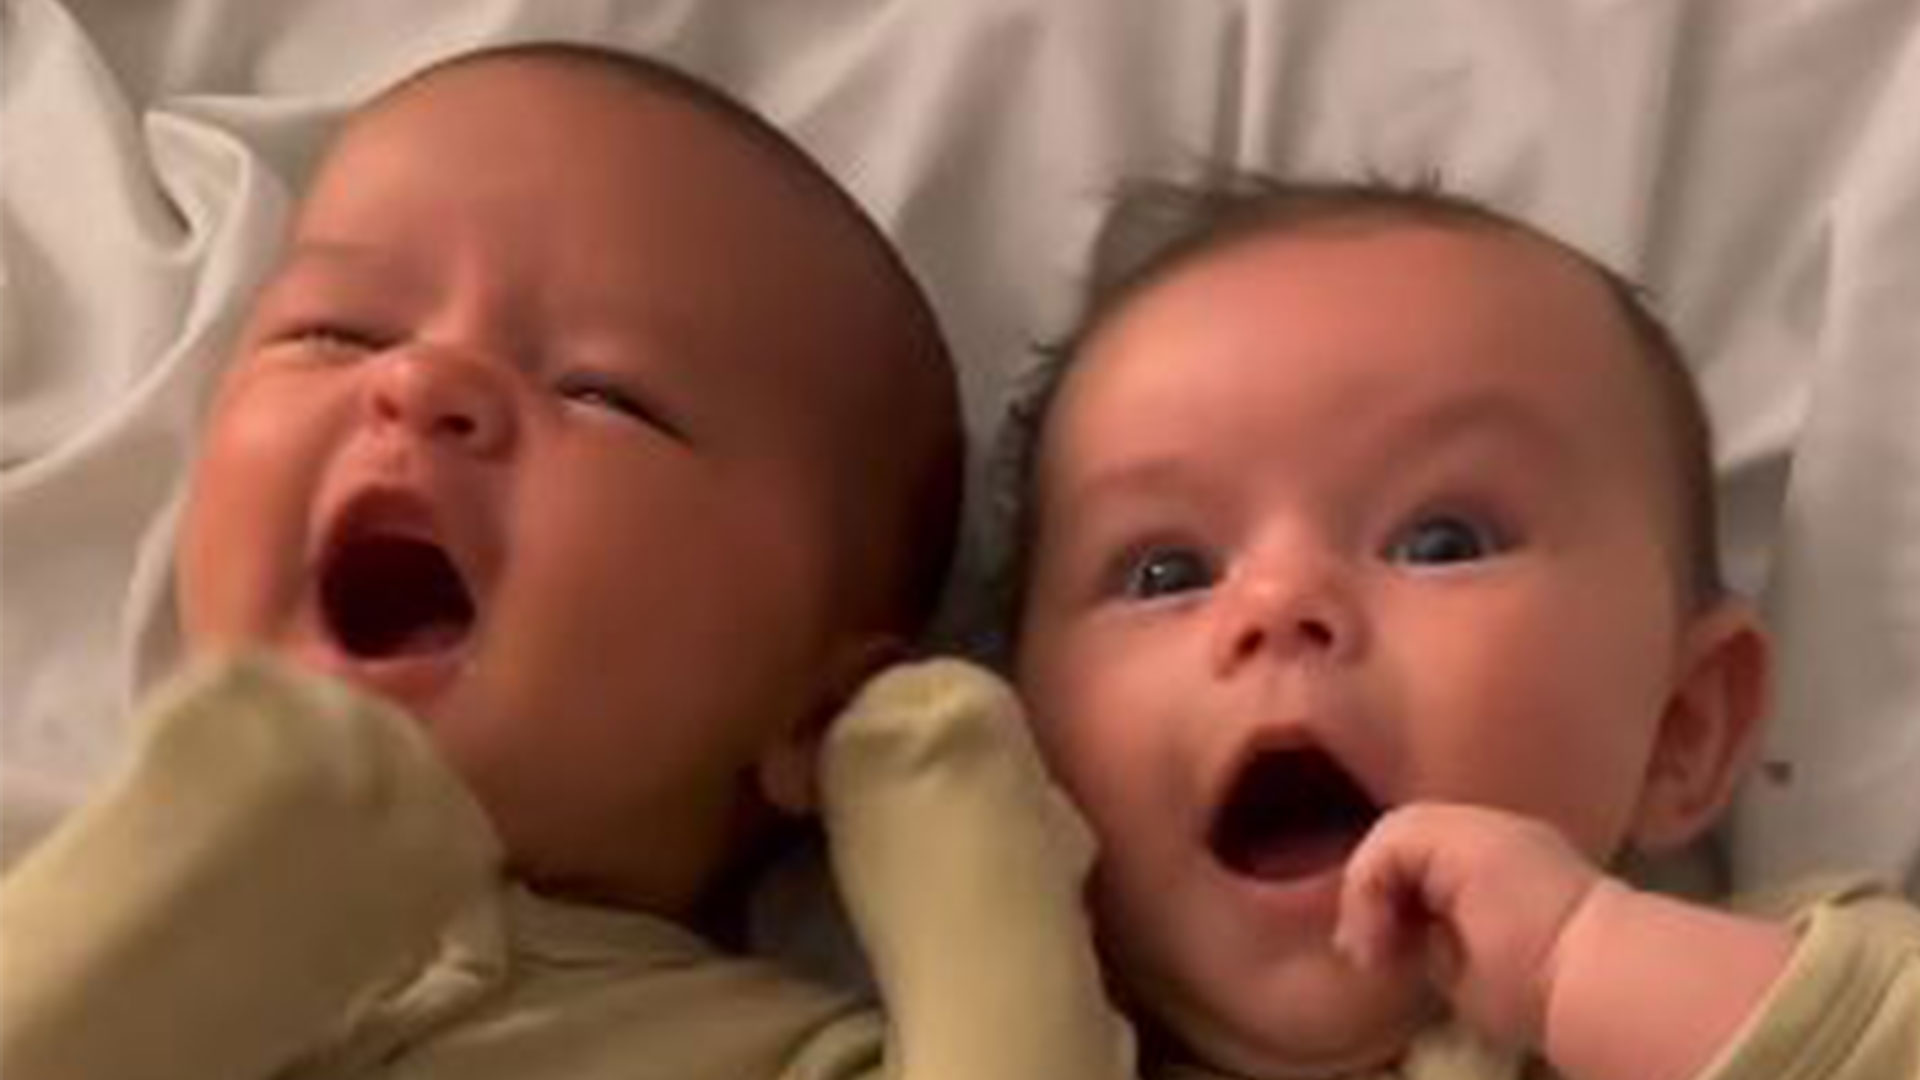 I’m a mum to newborn ‘twins’ – they were born a week apart and aren’t related but look so alike